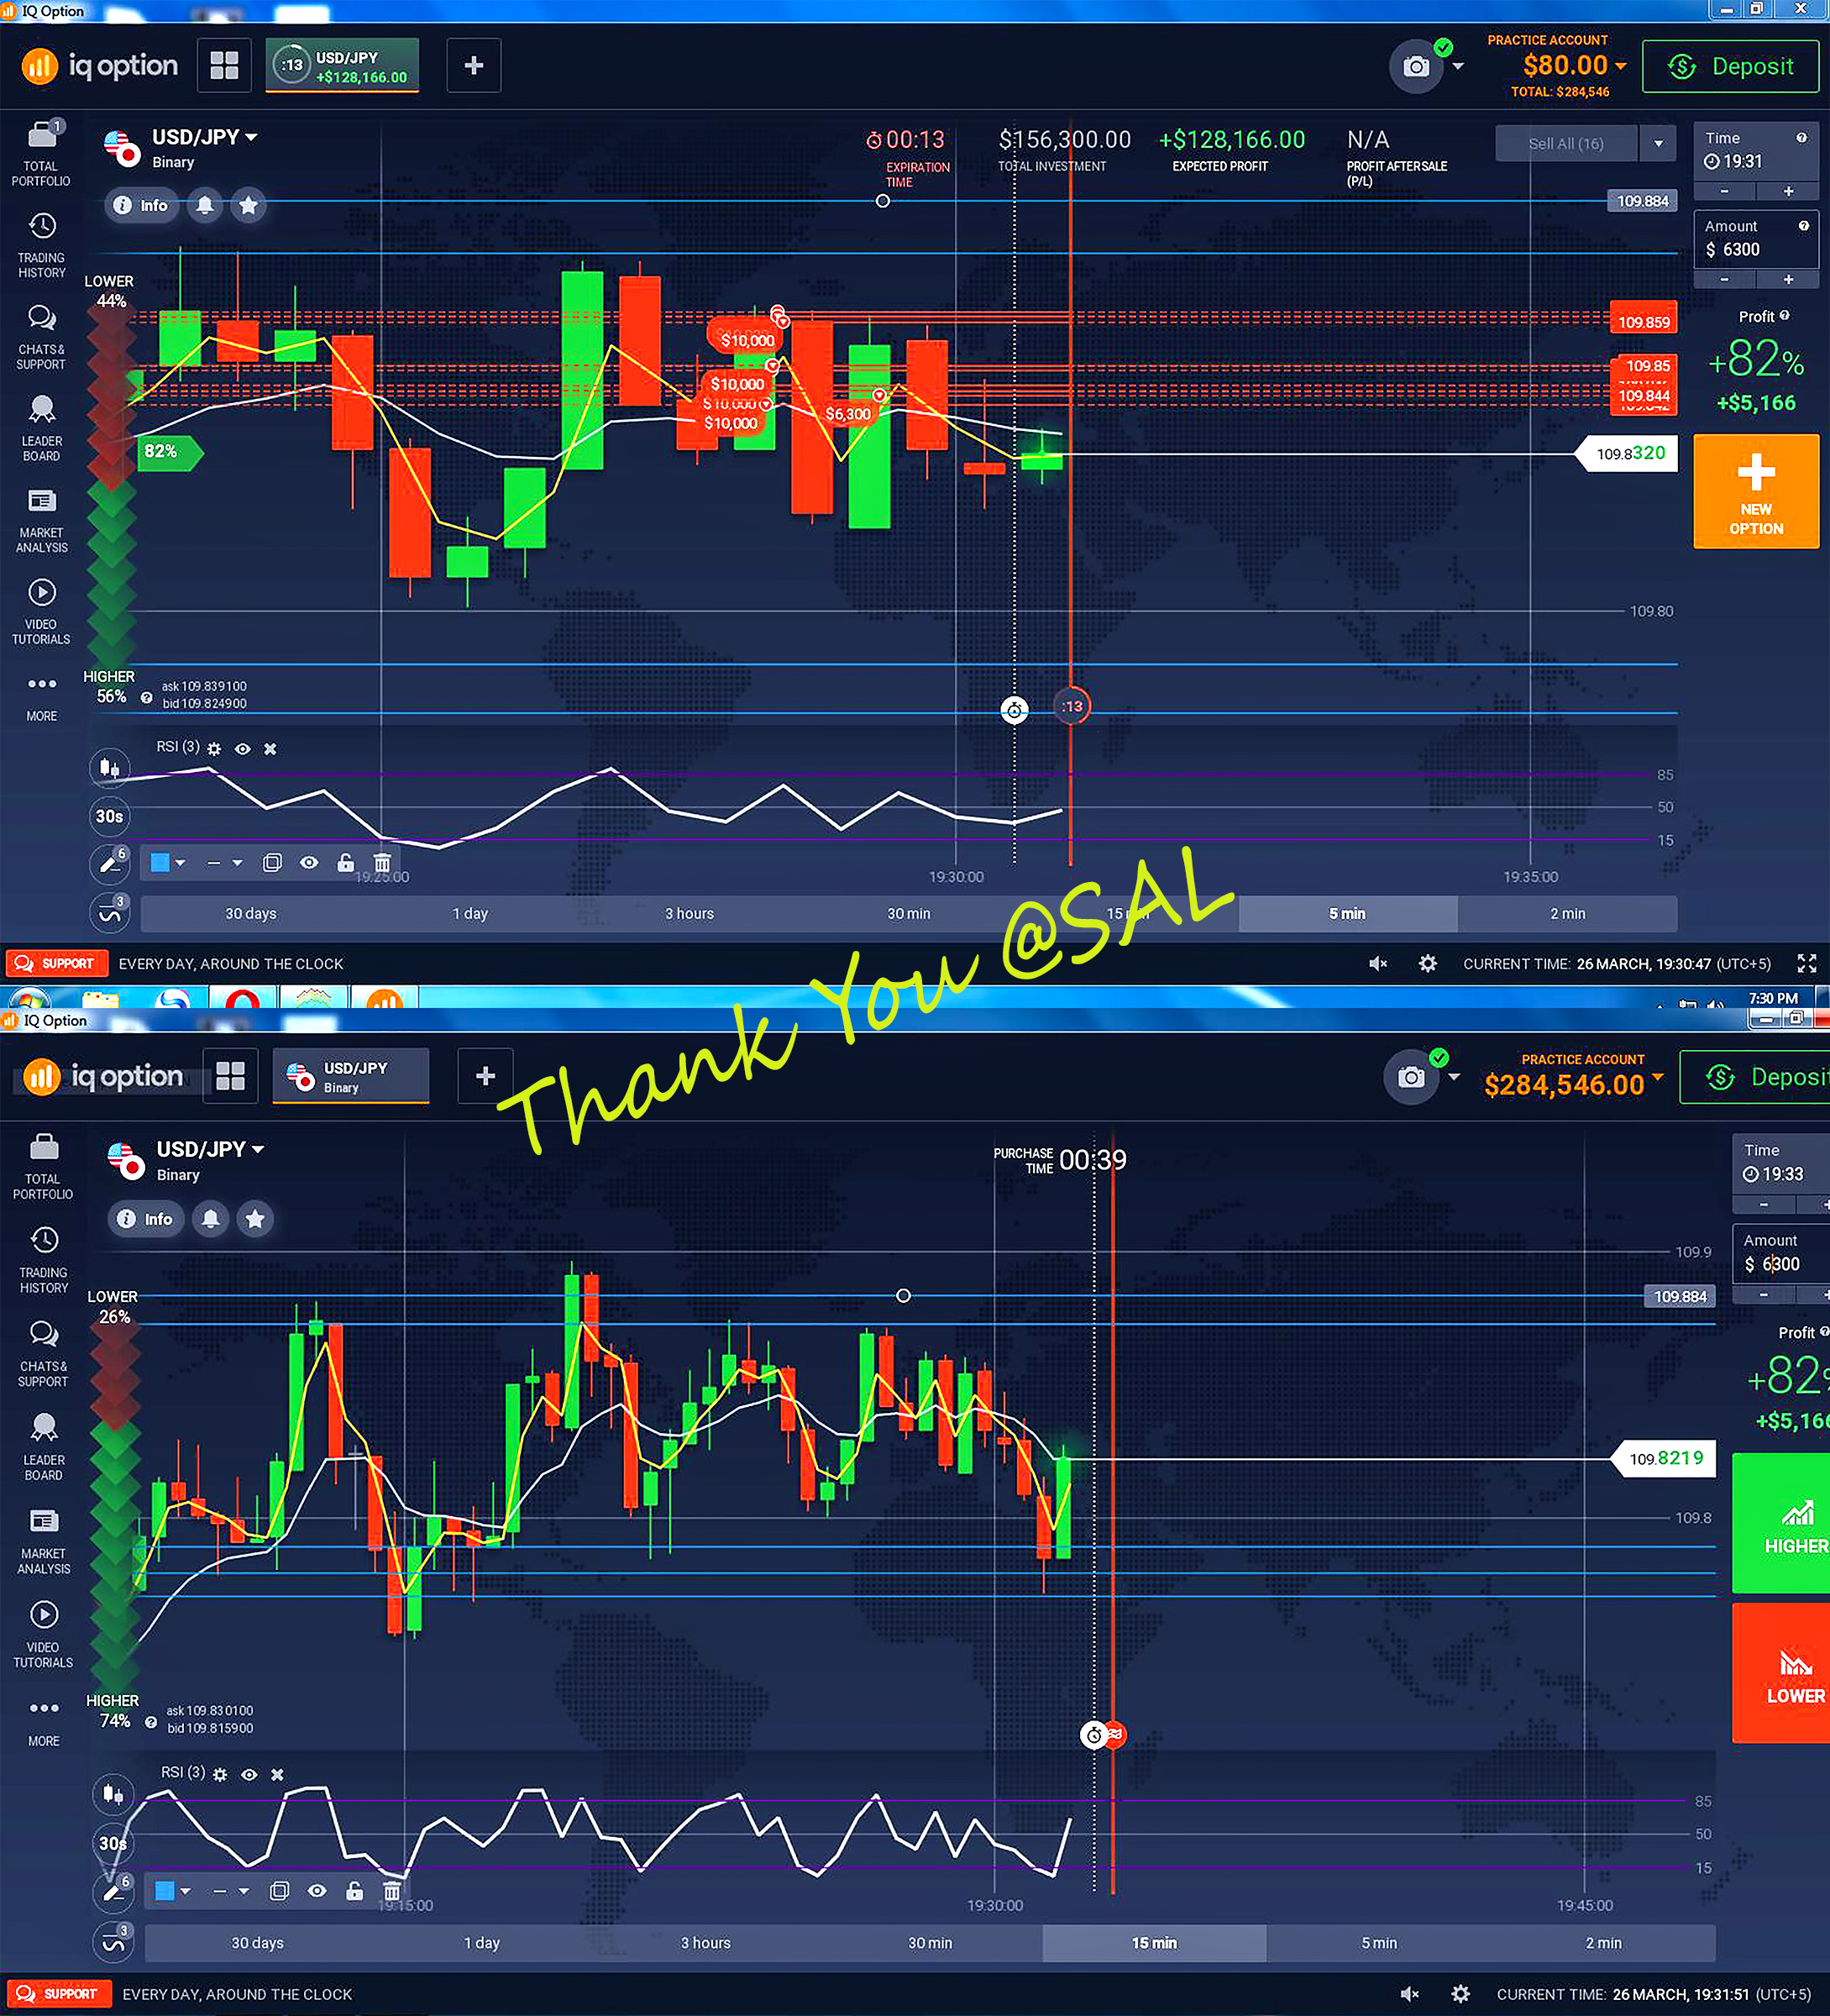 Binary options for us traders